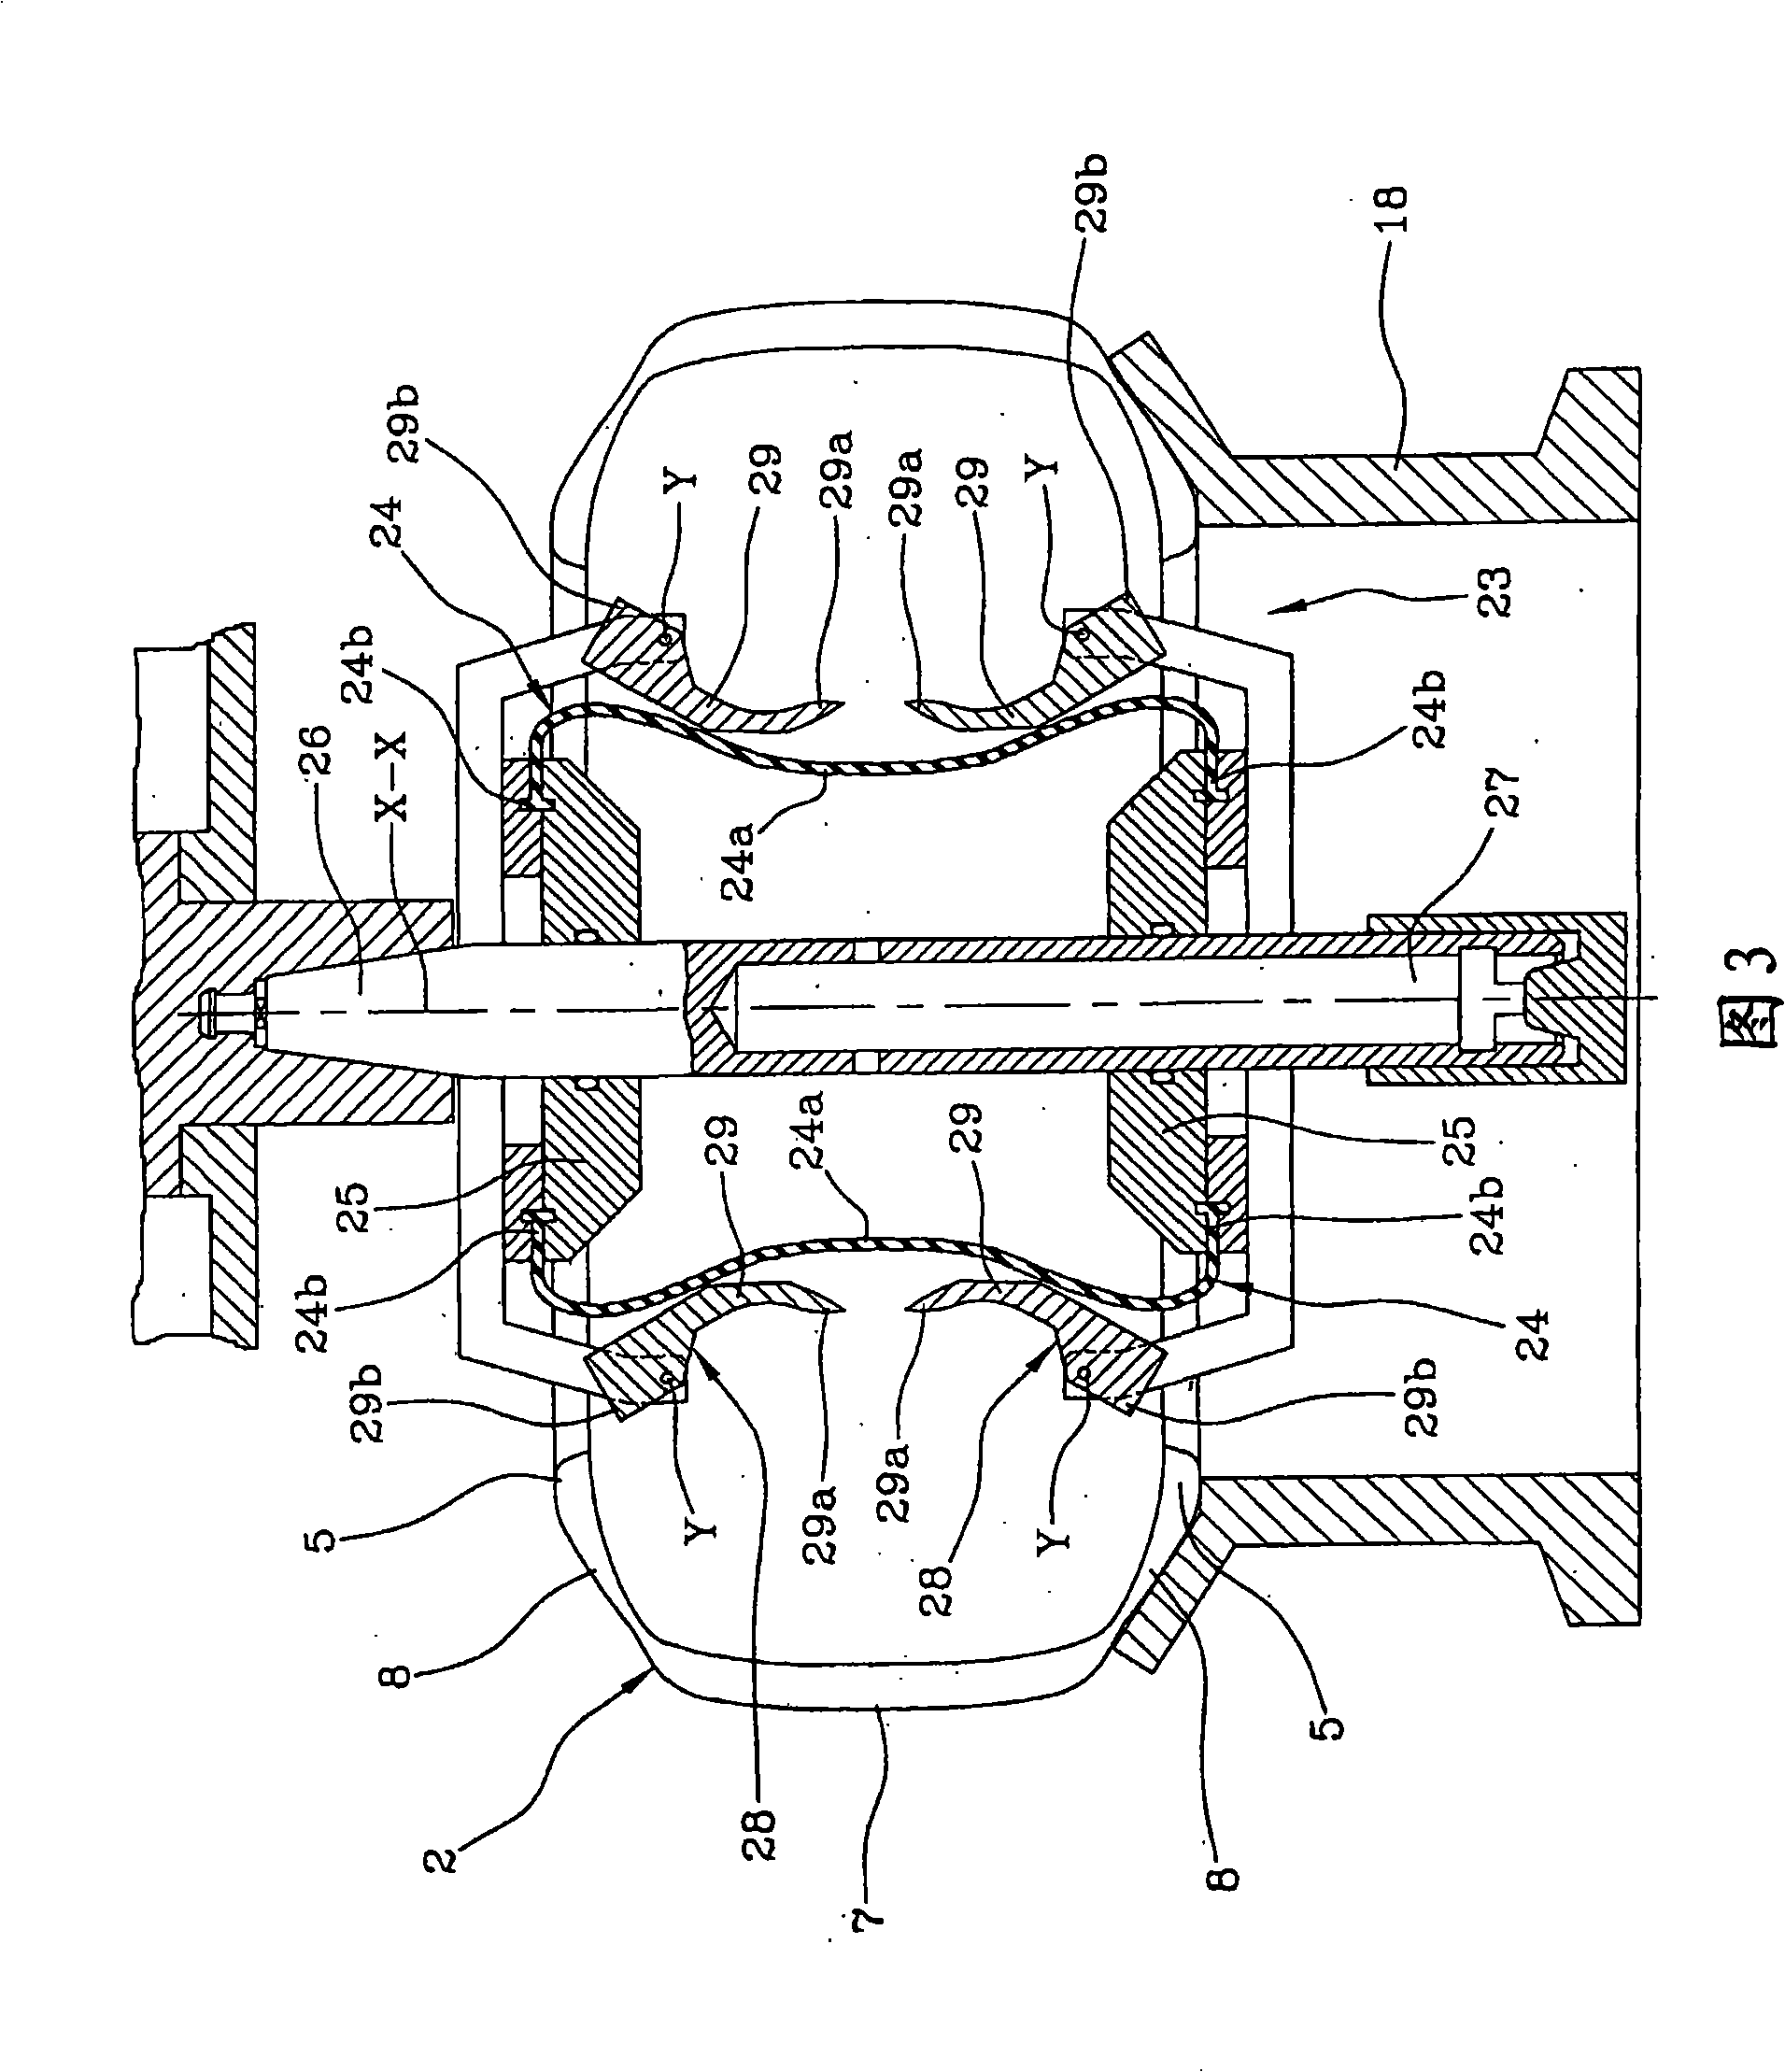 Method and equipment for producing tire